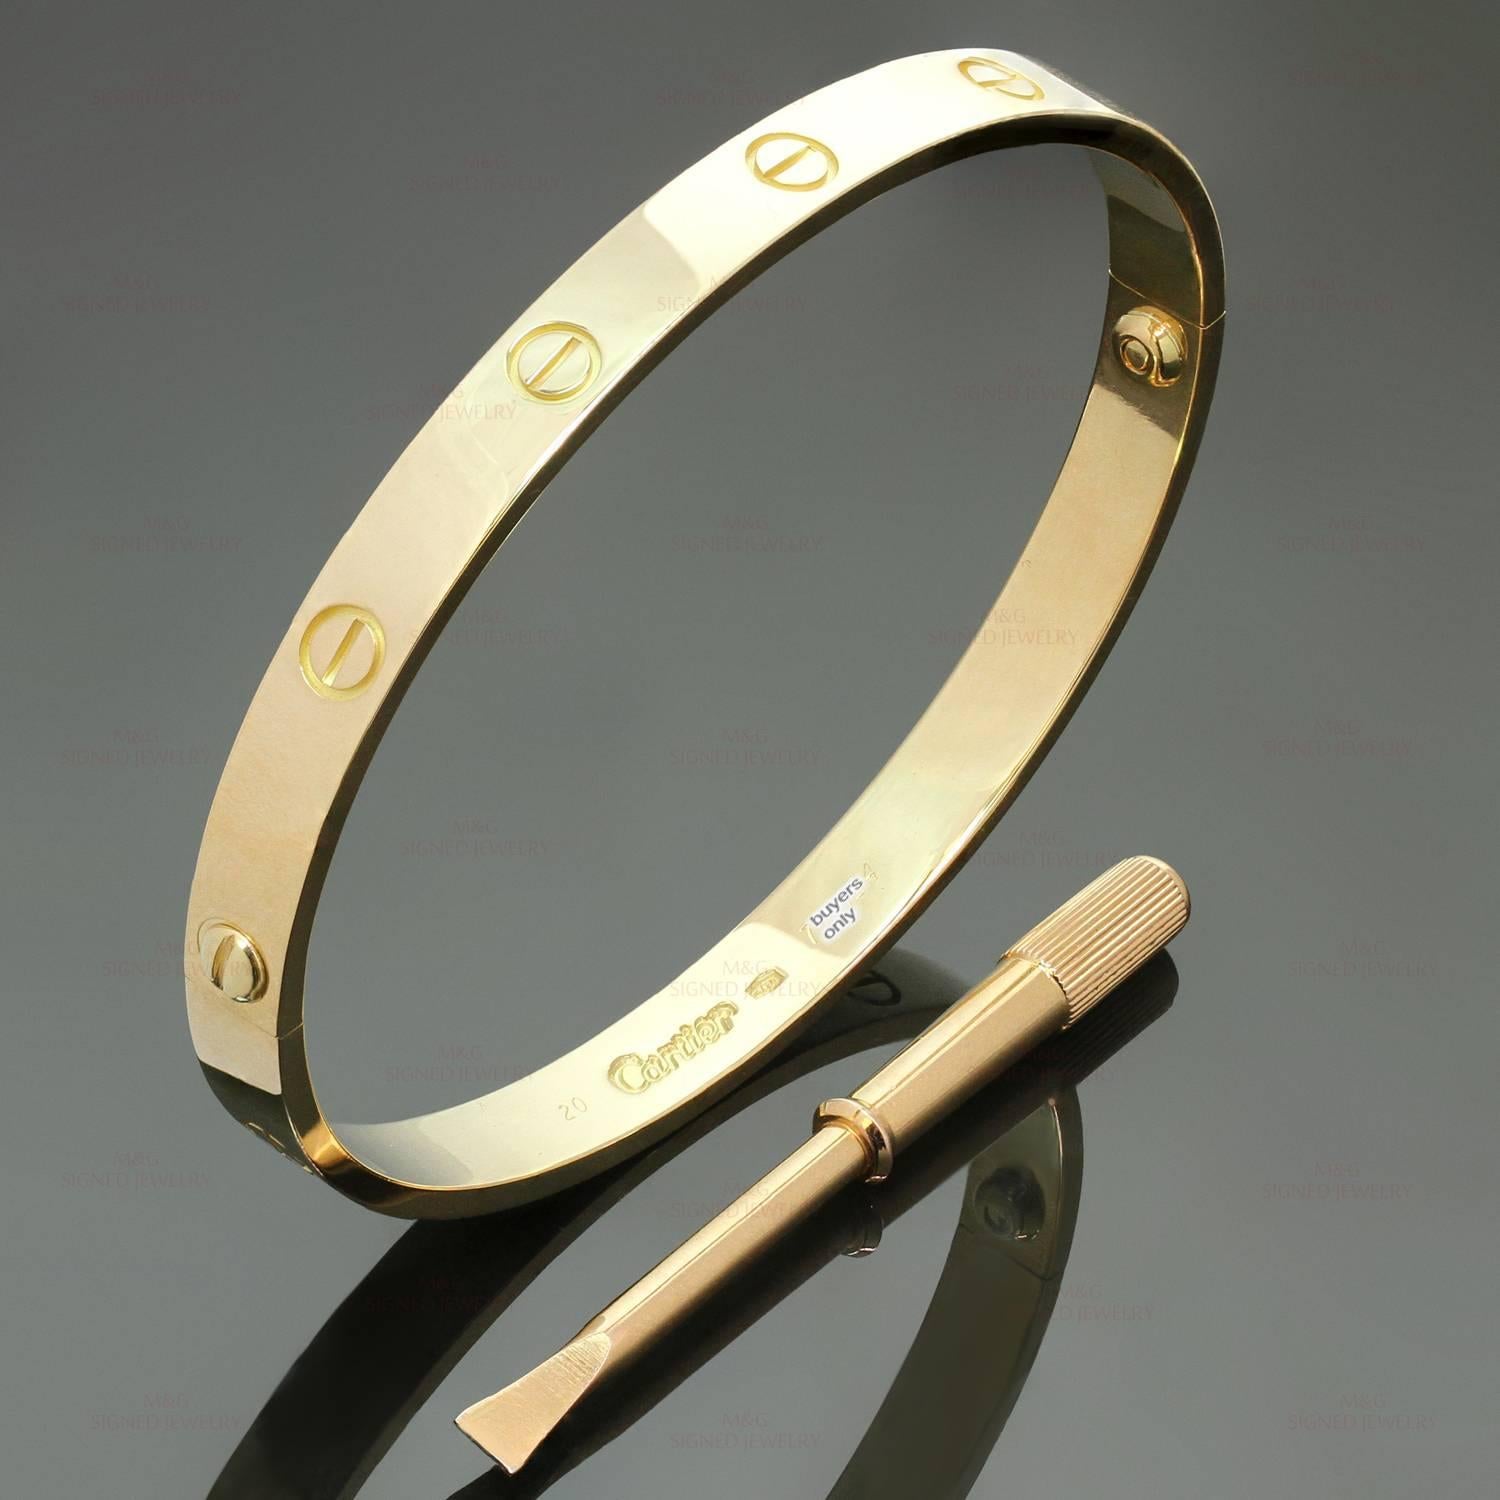 This iconic and timeless bracelet from Cartier's Love collection is finely crafted in 18k yellow gold and completed with the original Cartier screwdriver. This bangle is a size 20. Made in France circa 2000s. Measurements: 0.23